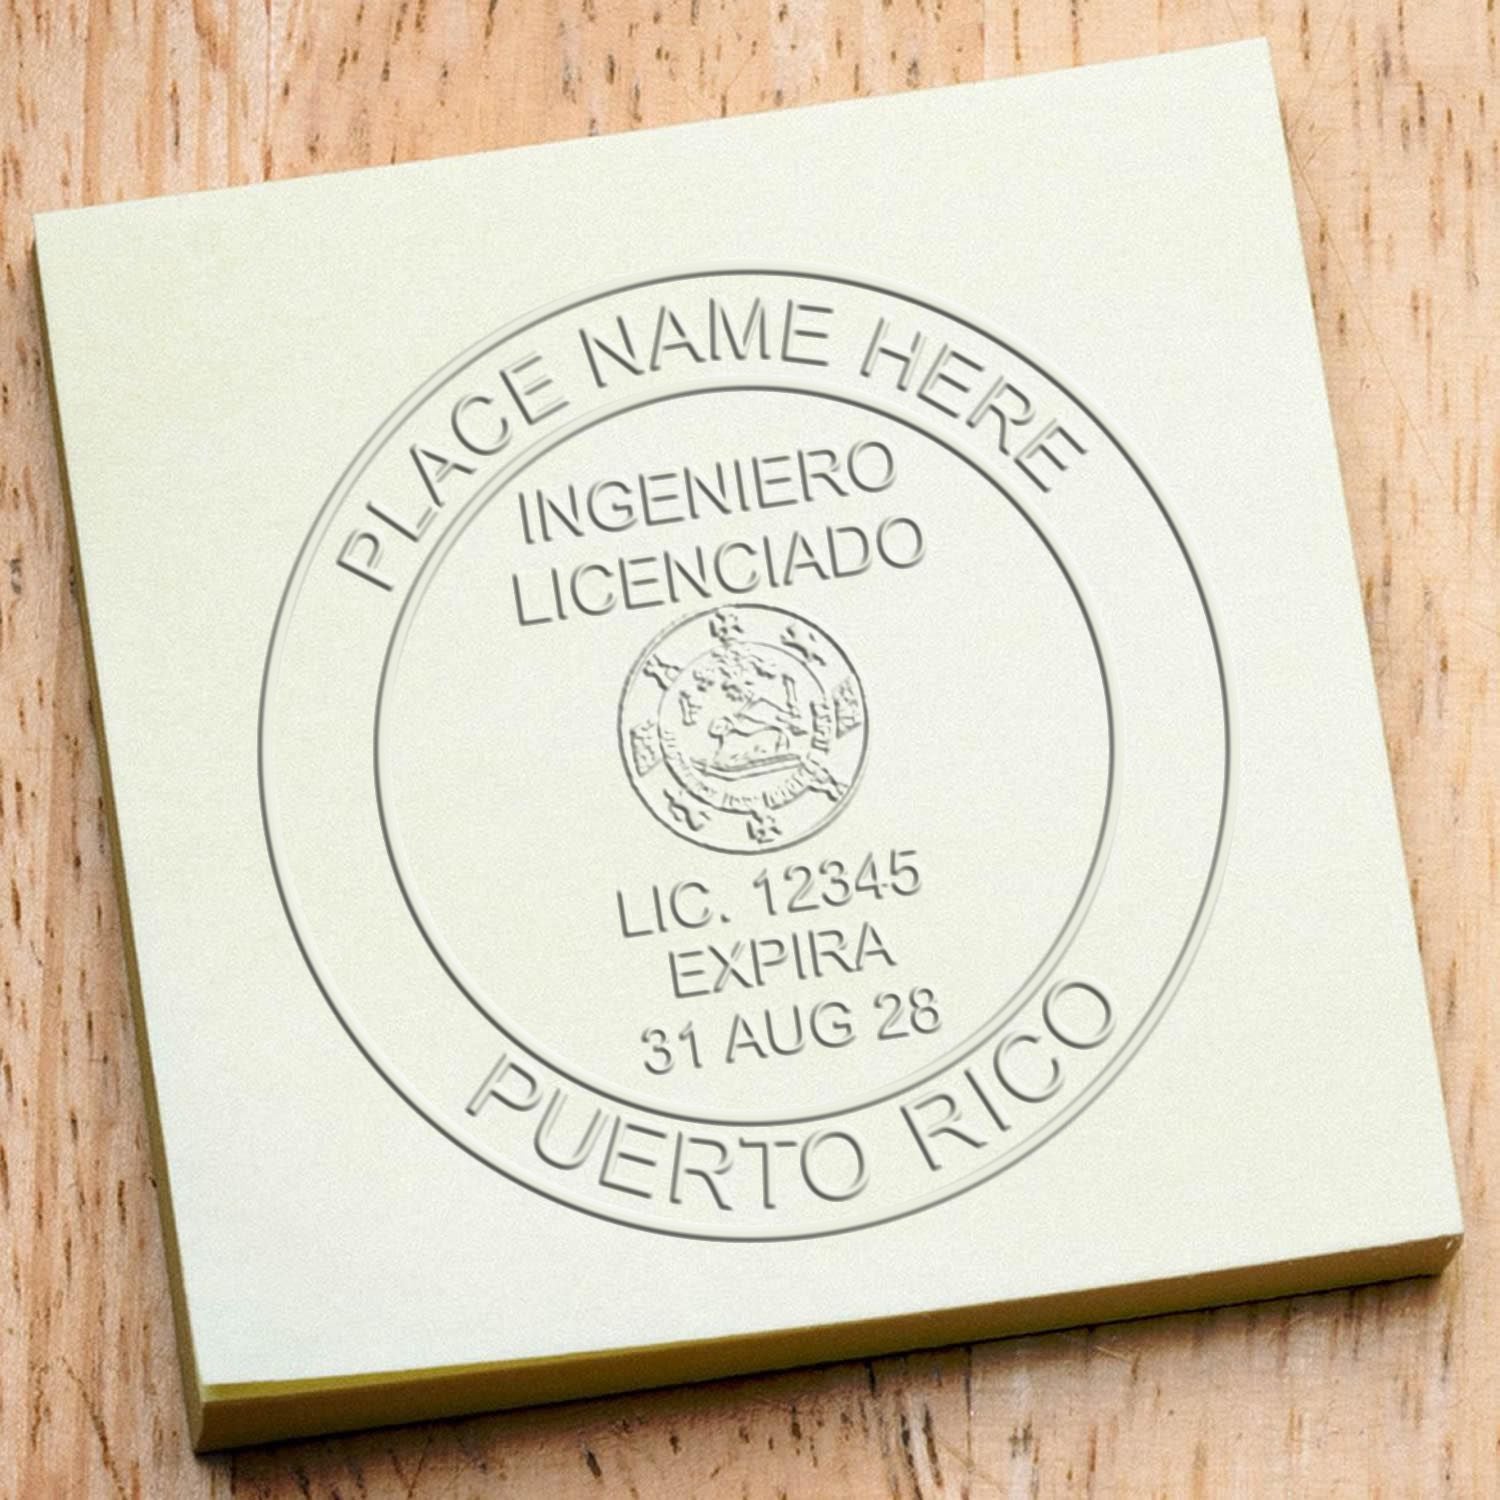 A photograph of the Puerto Rico Engineer Desk Seal stamp impression reveals a vivid, professional image of the on paper.